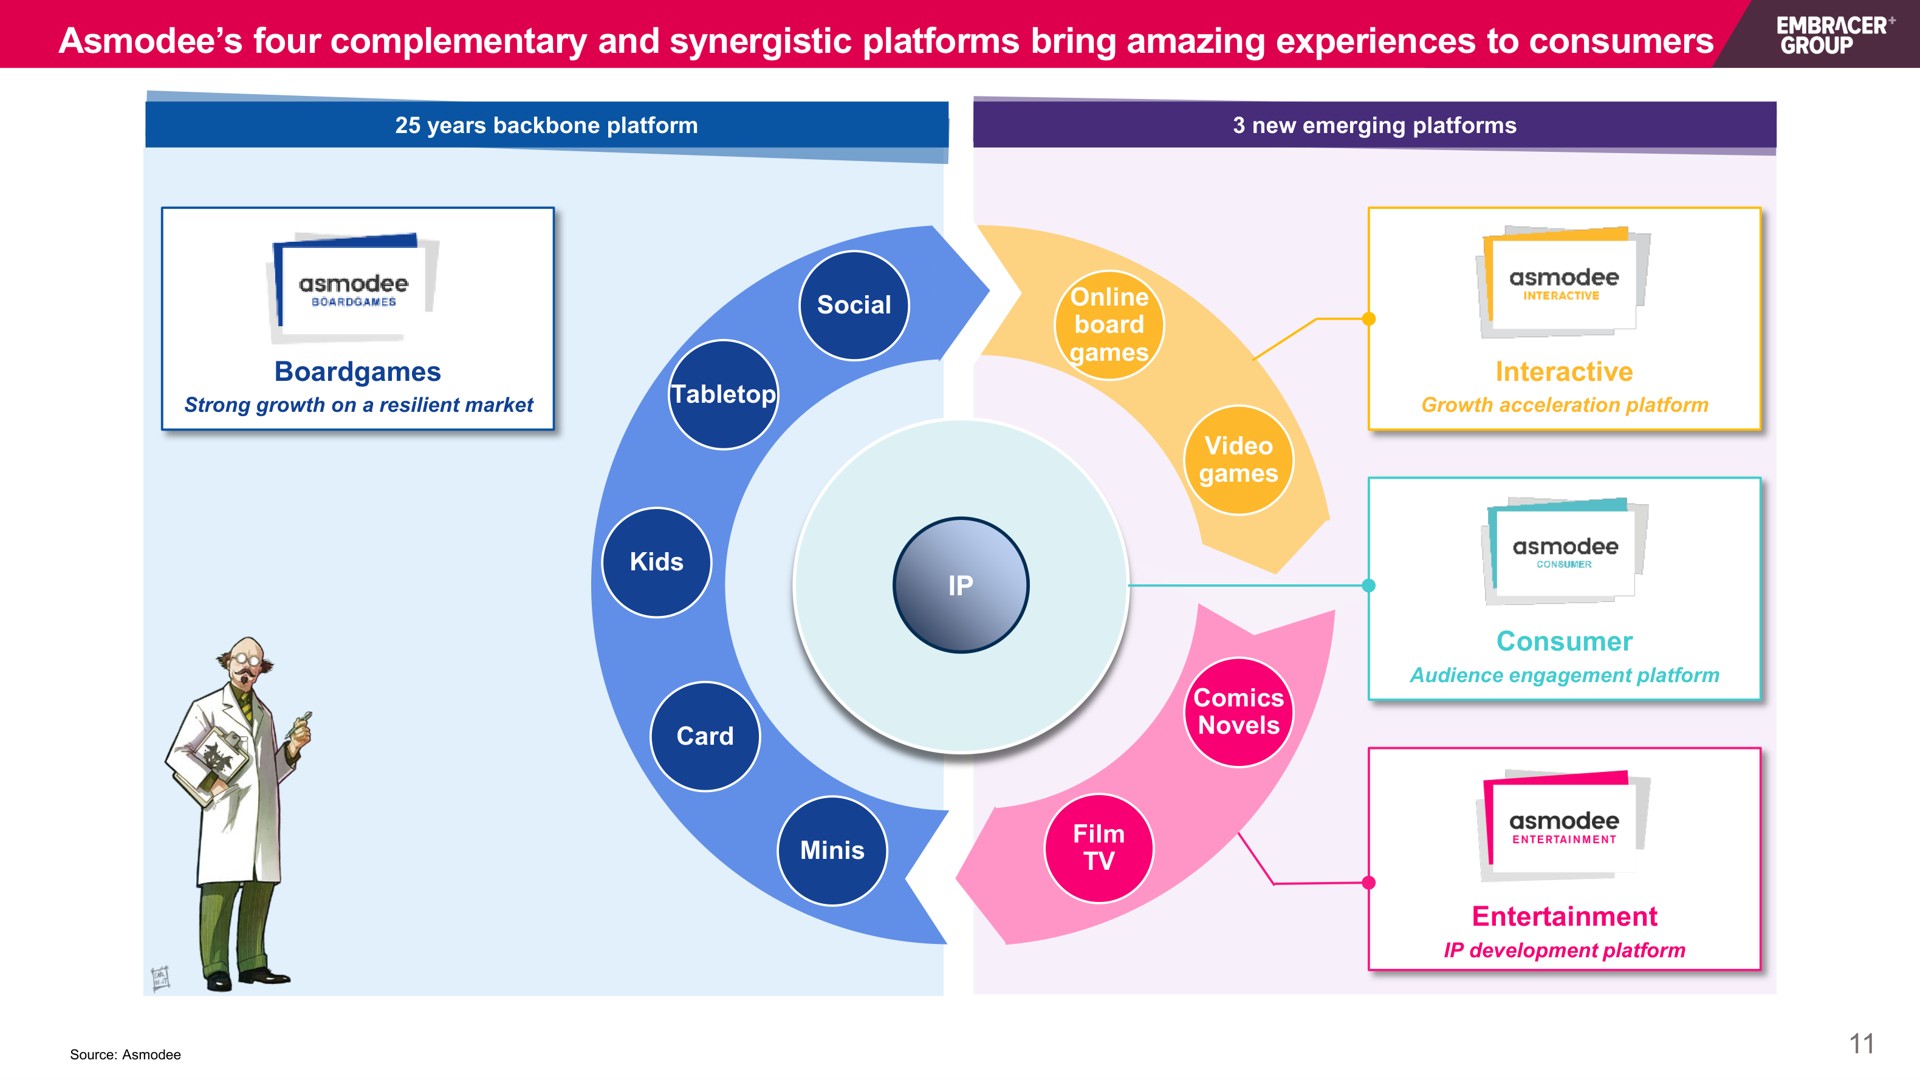 four complementary and synergistic platforms bring amazing experiences to consumers | Embracer Group